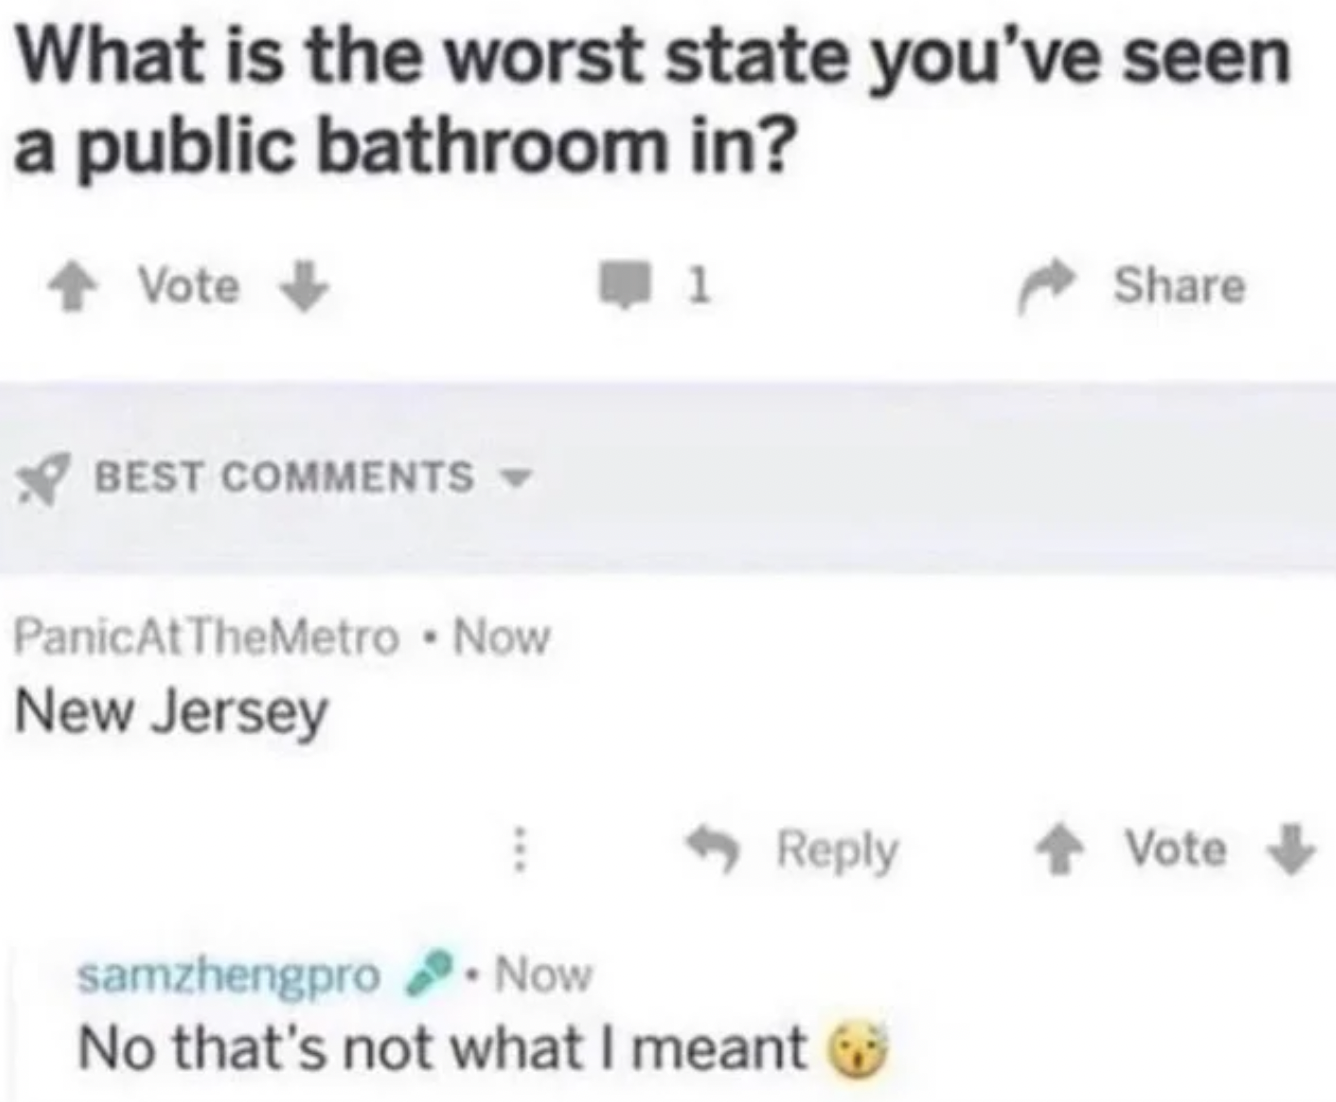 Pictures that techincally tell the truth - worst state you ve seen a public bathroom in - What is the worst state you've seen a public bathroom in?